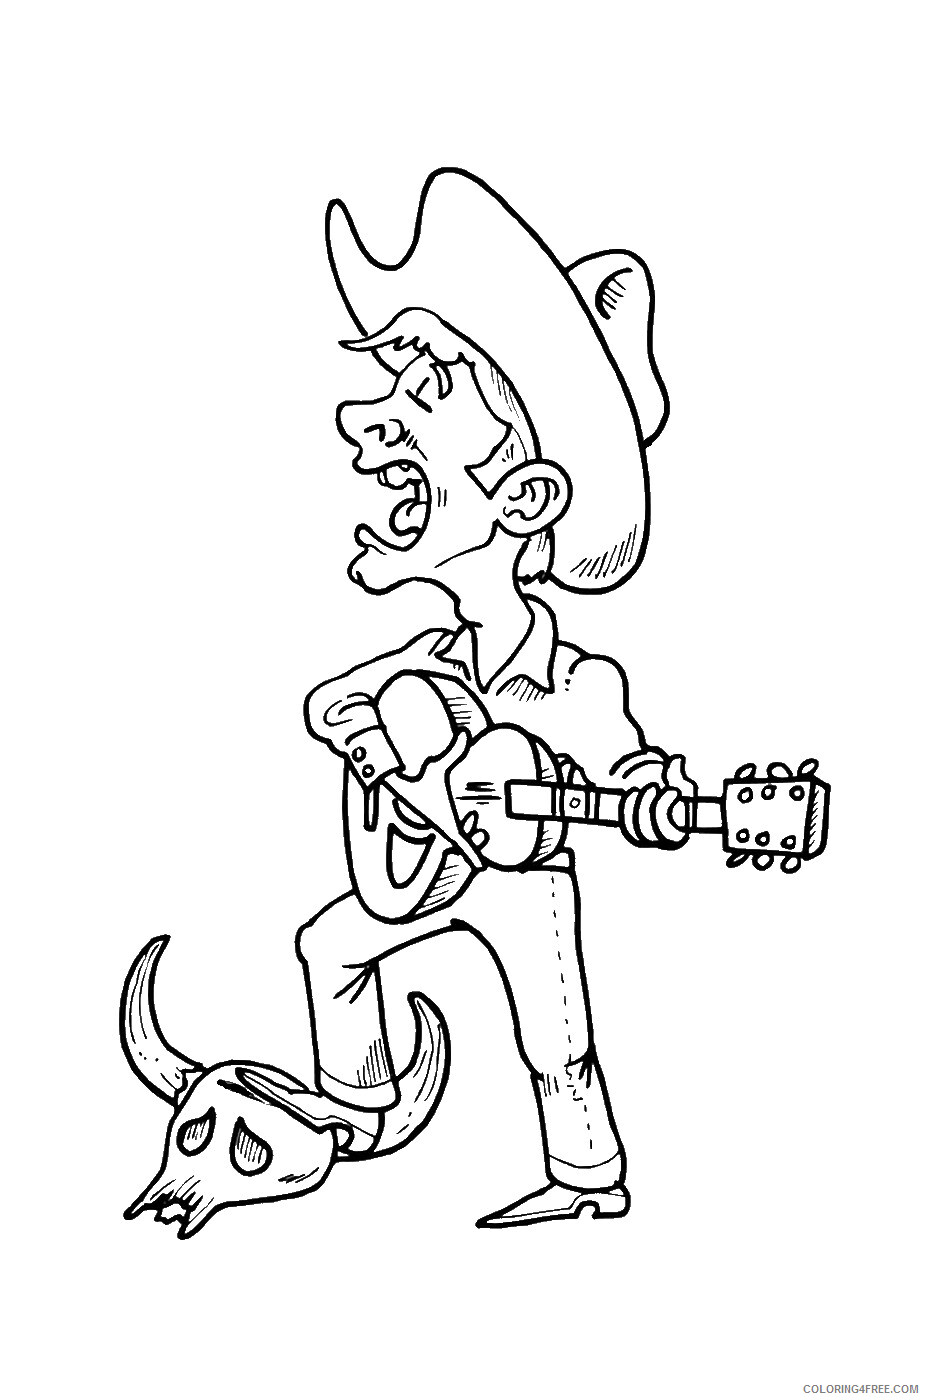 Rock Star Coloring Pages rock_star_coloring_1 Printable 2021 5097 Coloring4free